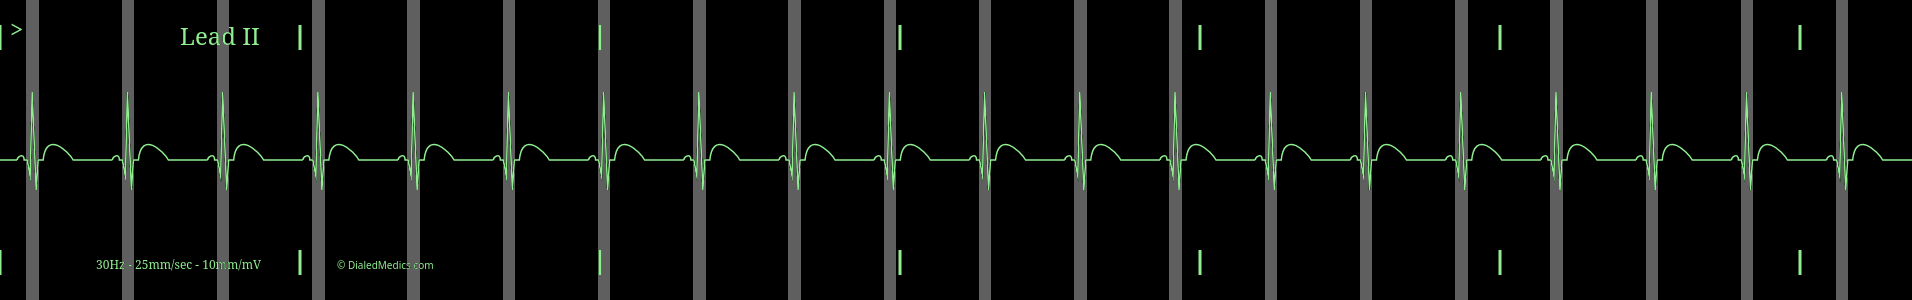 ECG monitor screen capture of Regular Sinus Rhythm with highlighted QRS Complexes and a HR of 63.